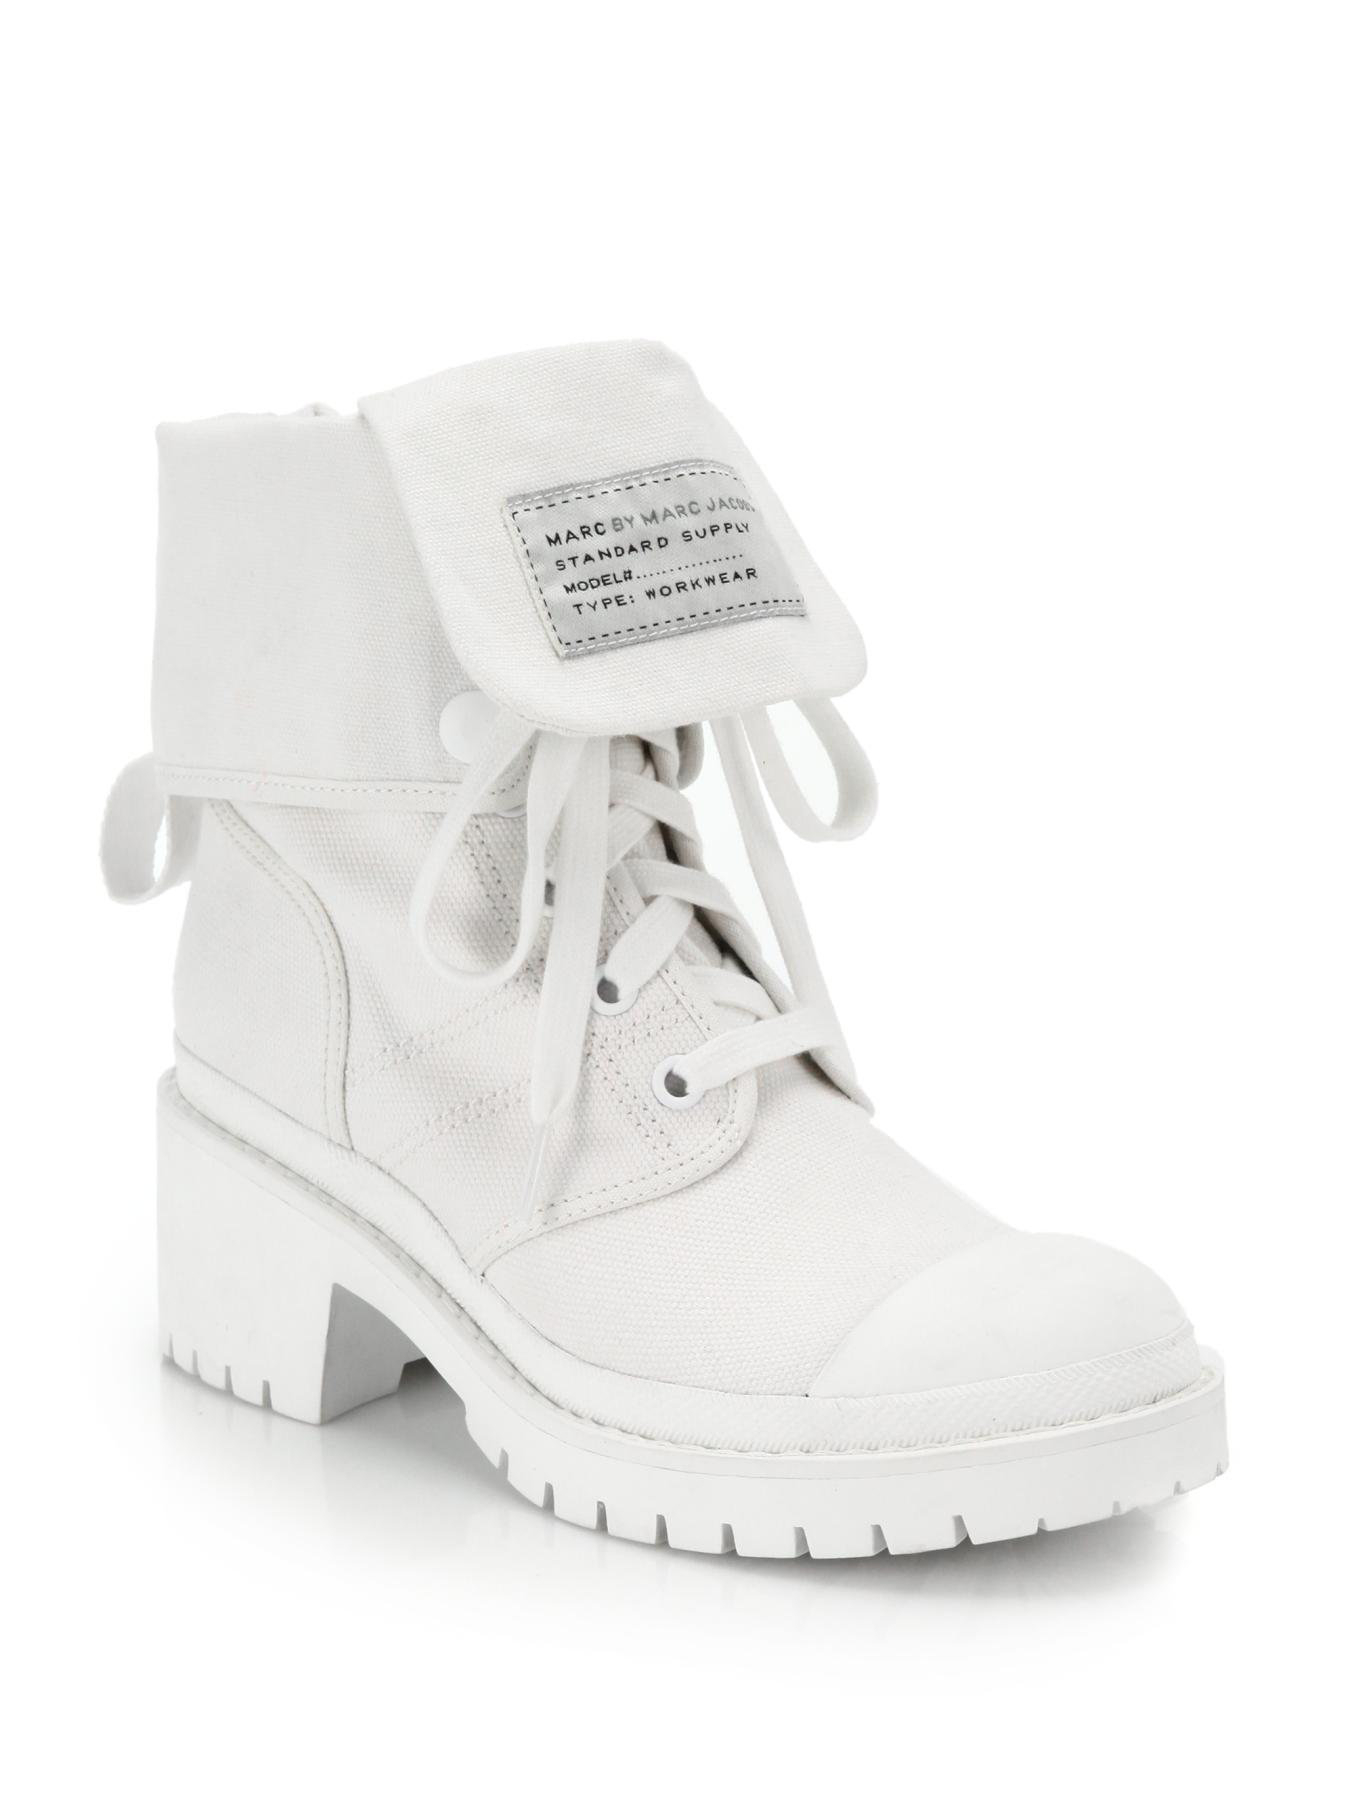 white canvas boots